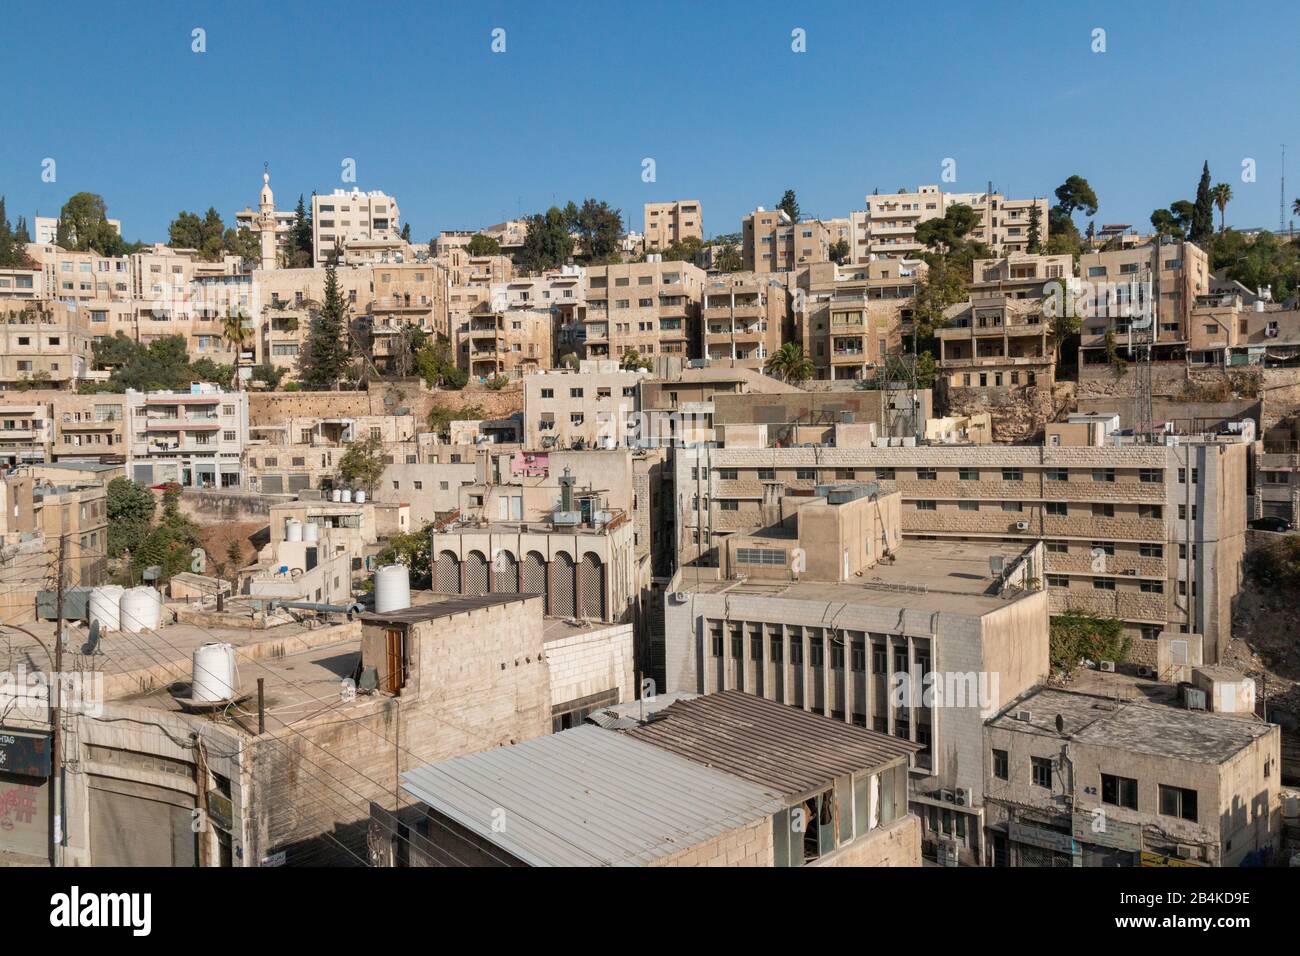 Jordan, Amman, view of a residential area in the old town of Amman. Stock Photo